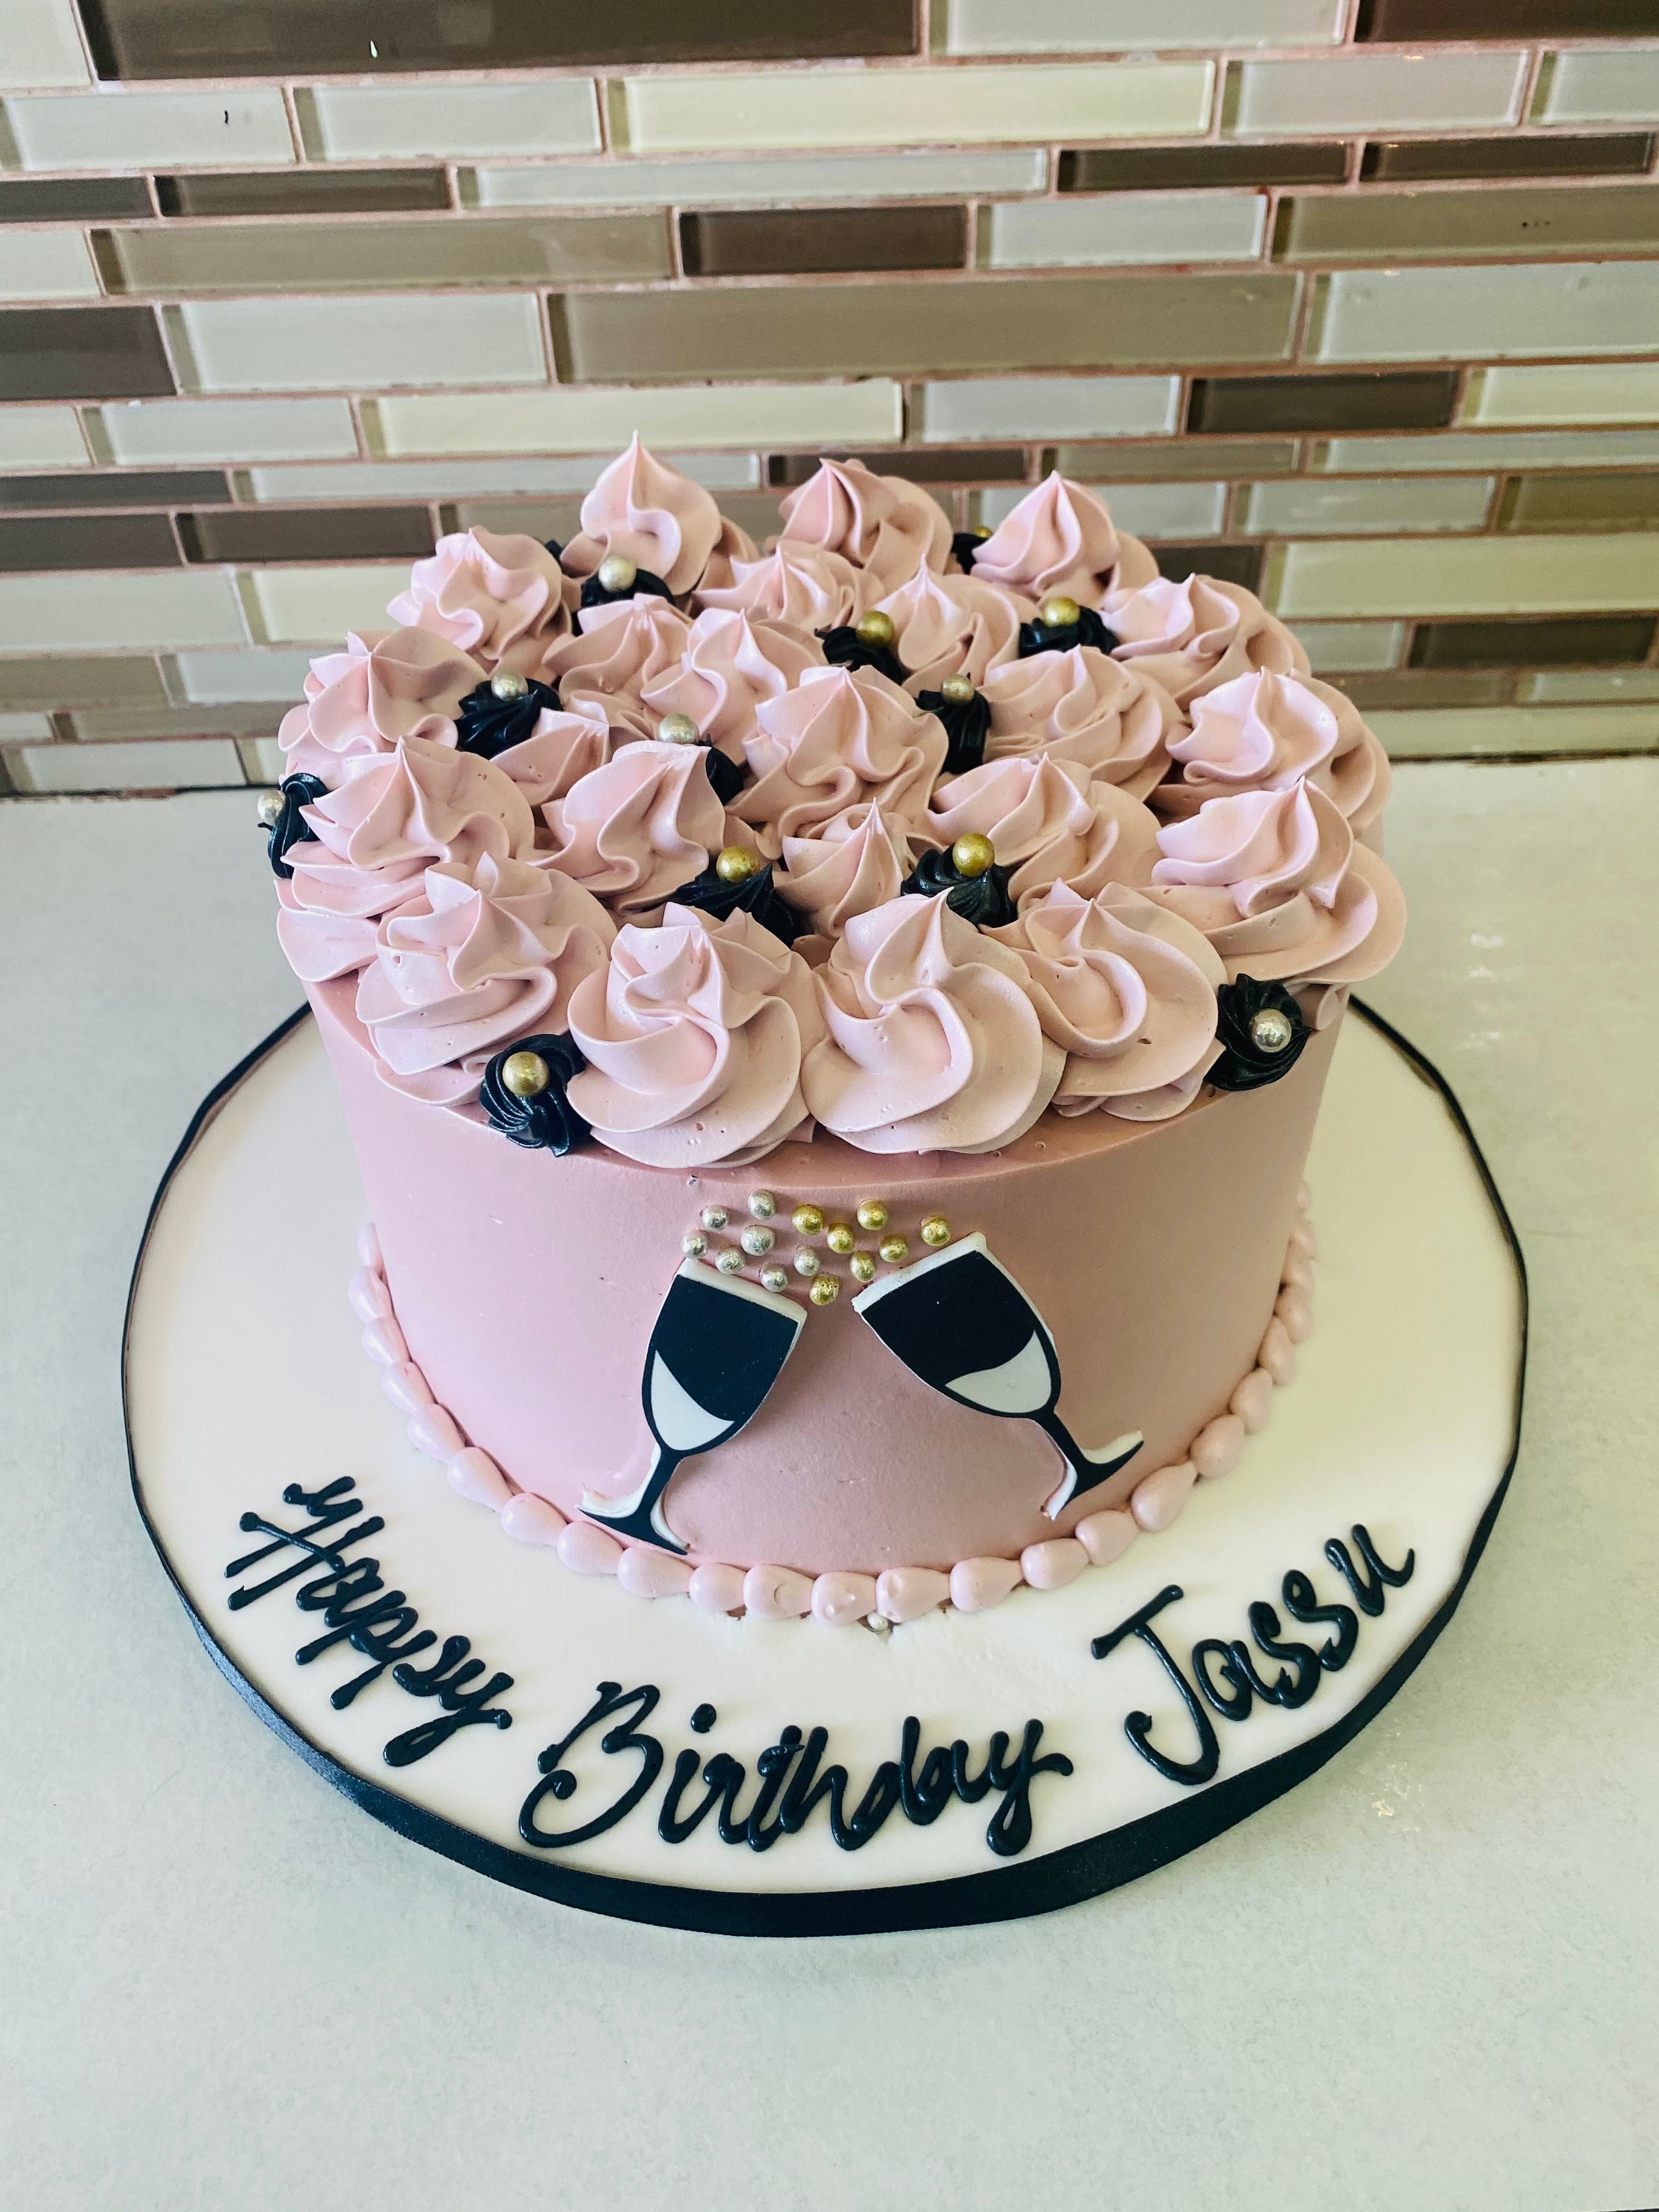 Bottle Of Champagne Themed Birthday Cake | Susie's Cakes